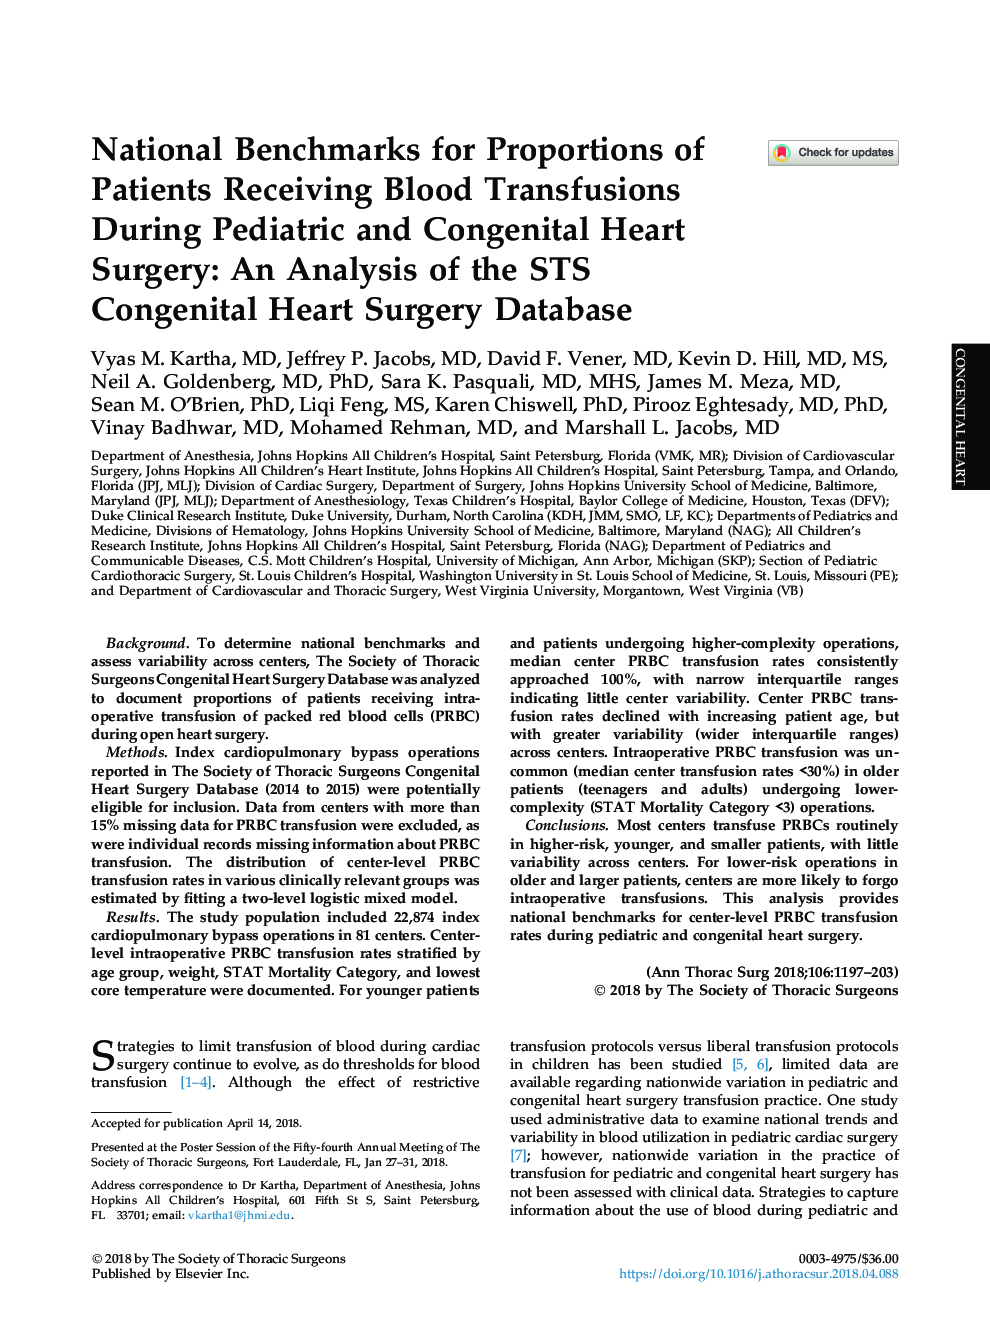 National Benchmarks for Proportions of Patients Receiving Blood Transfusions During Pediatric and Congenital Heart Surgery: An Analysis of the STS Congenital Heart Surgery Database